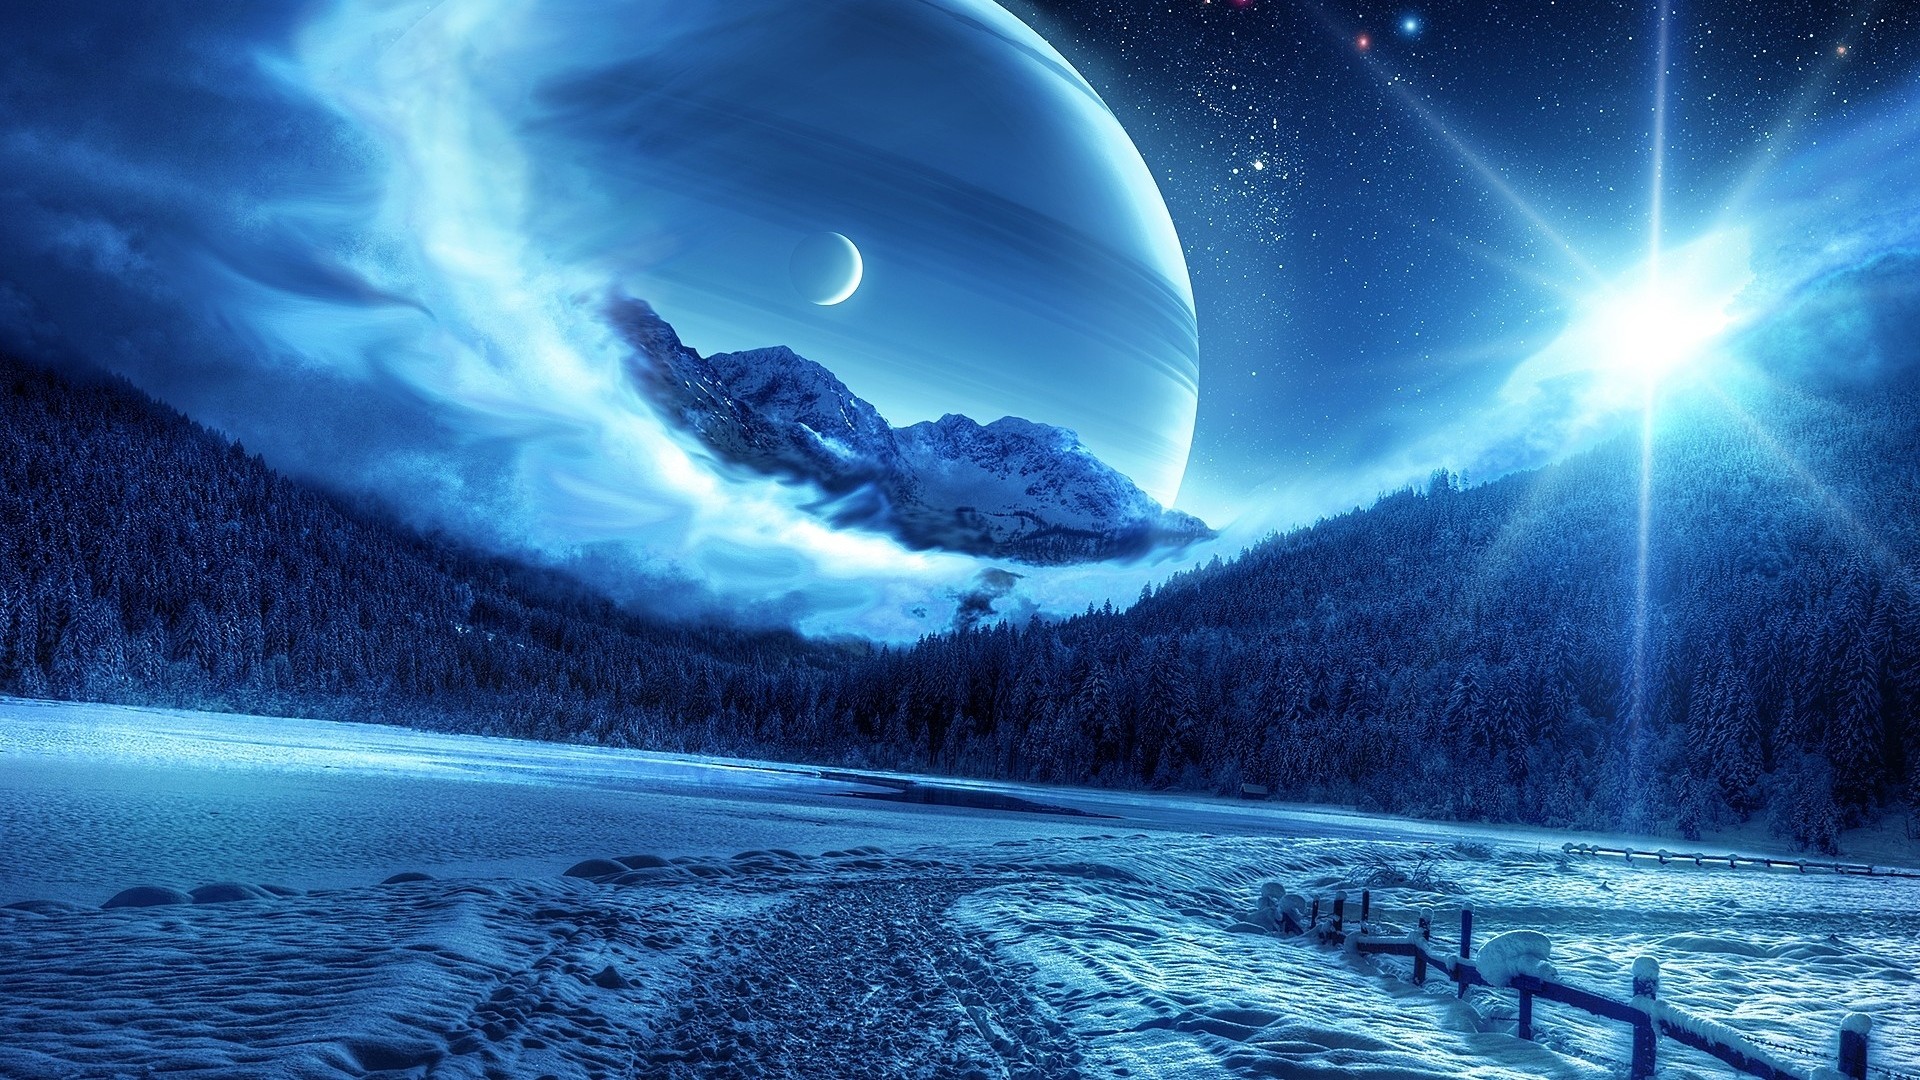 Preview wallpaper winter, night, mountains, road, planet, fantastic landscape 1920×1080